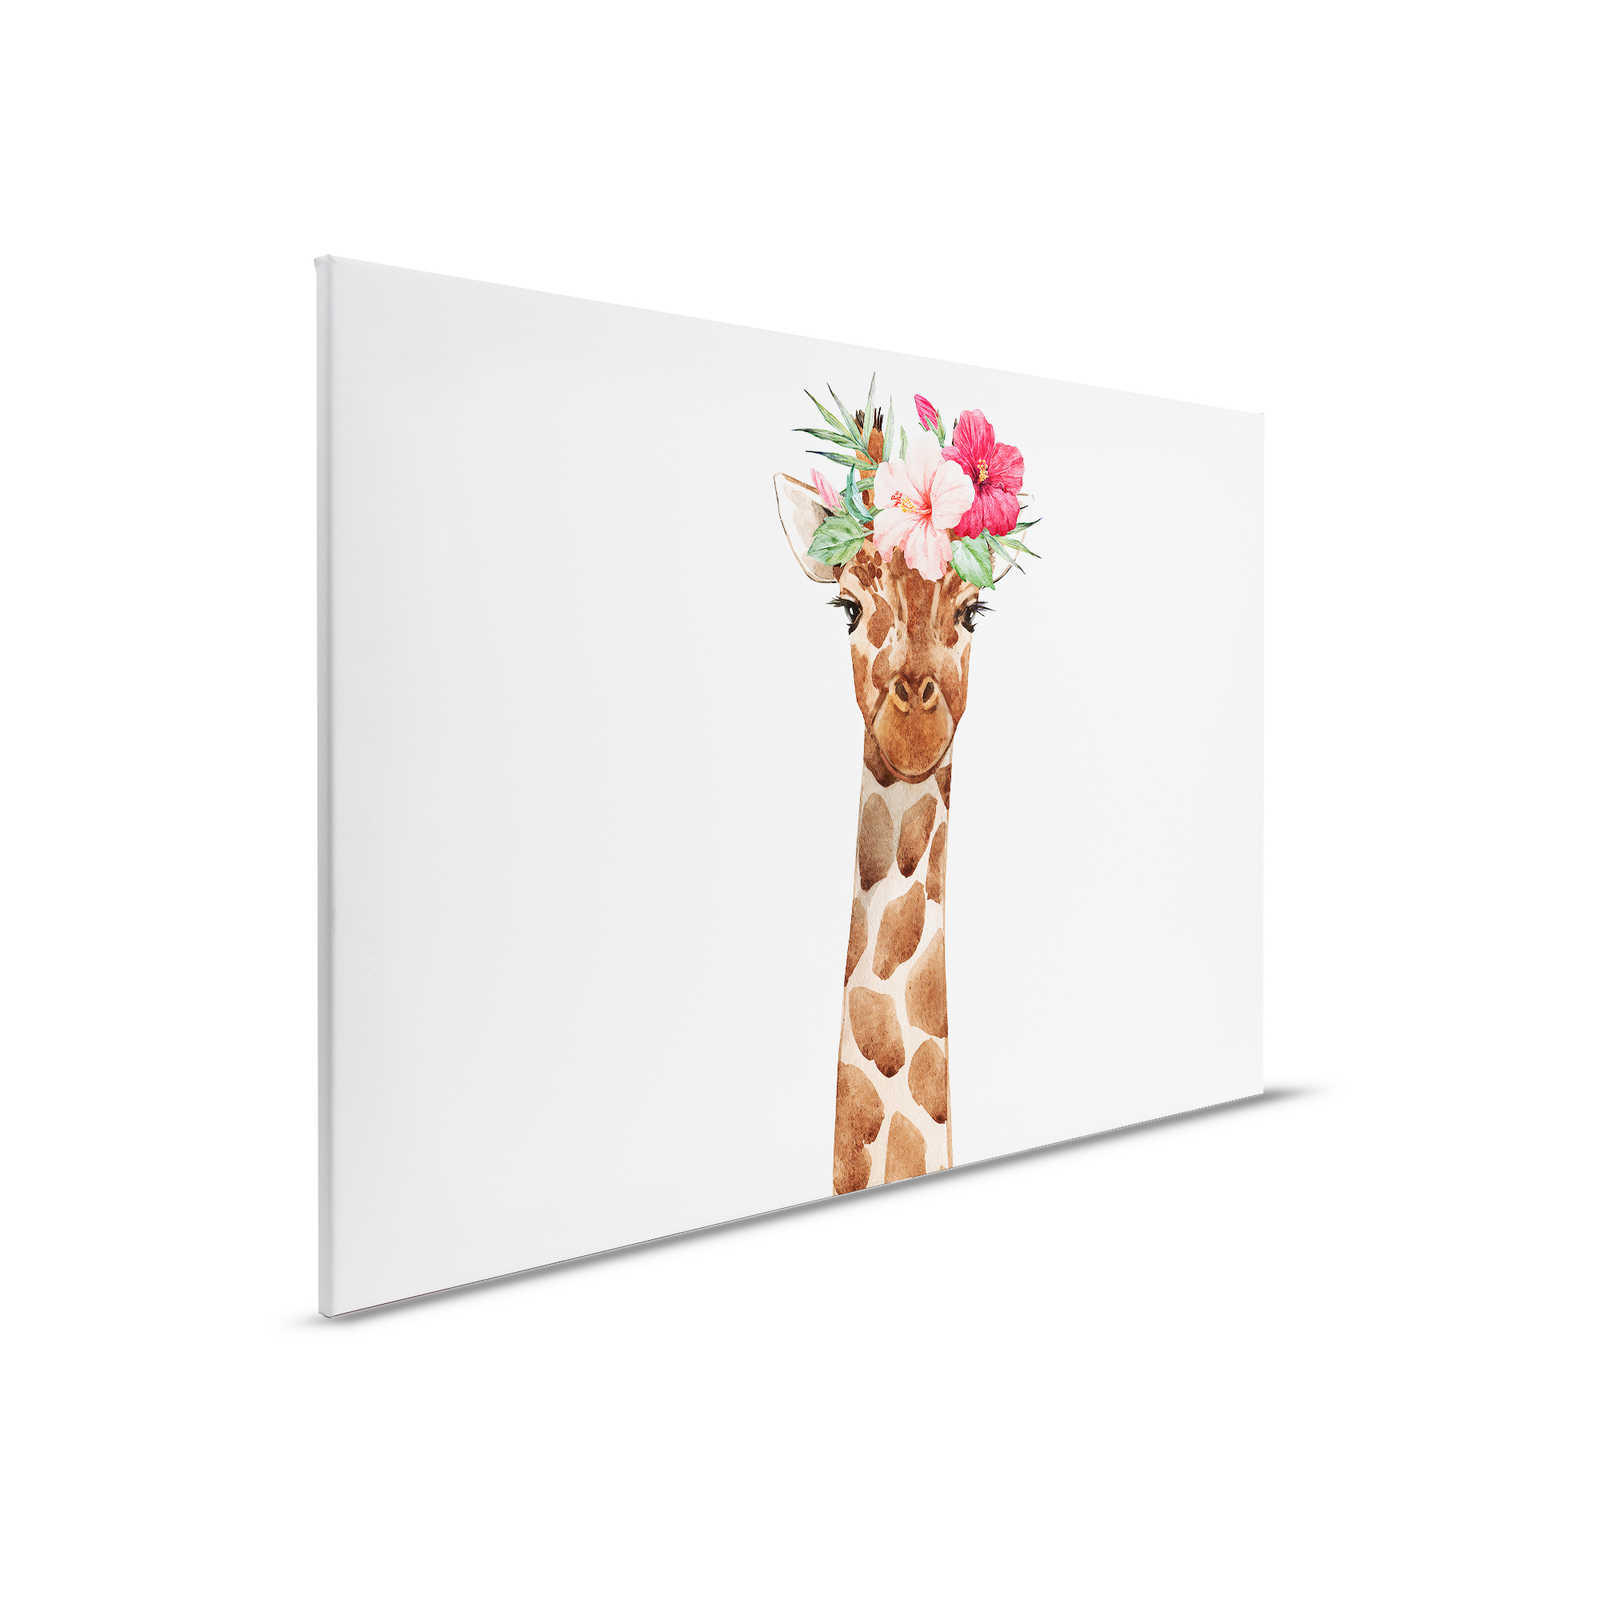         Canvas painting Nursery with giraffe and floral headdress - 0.90 m x 0.60 m
    